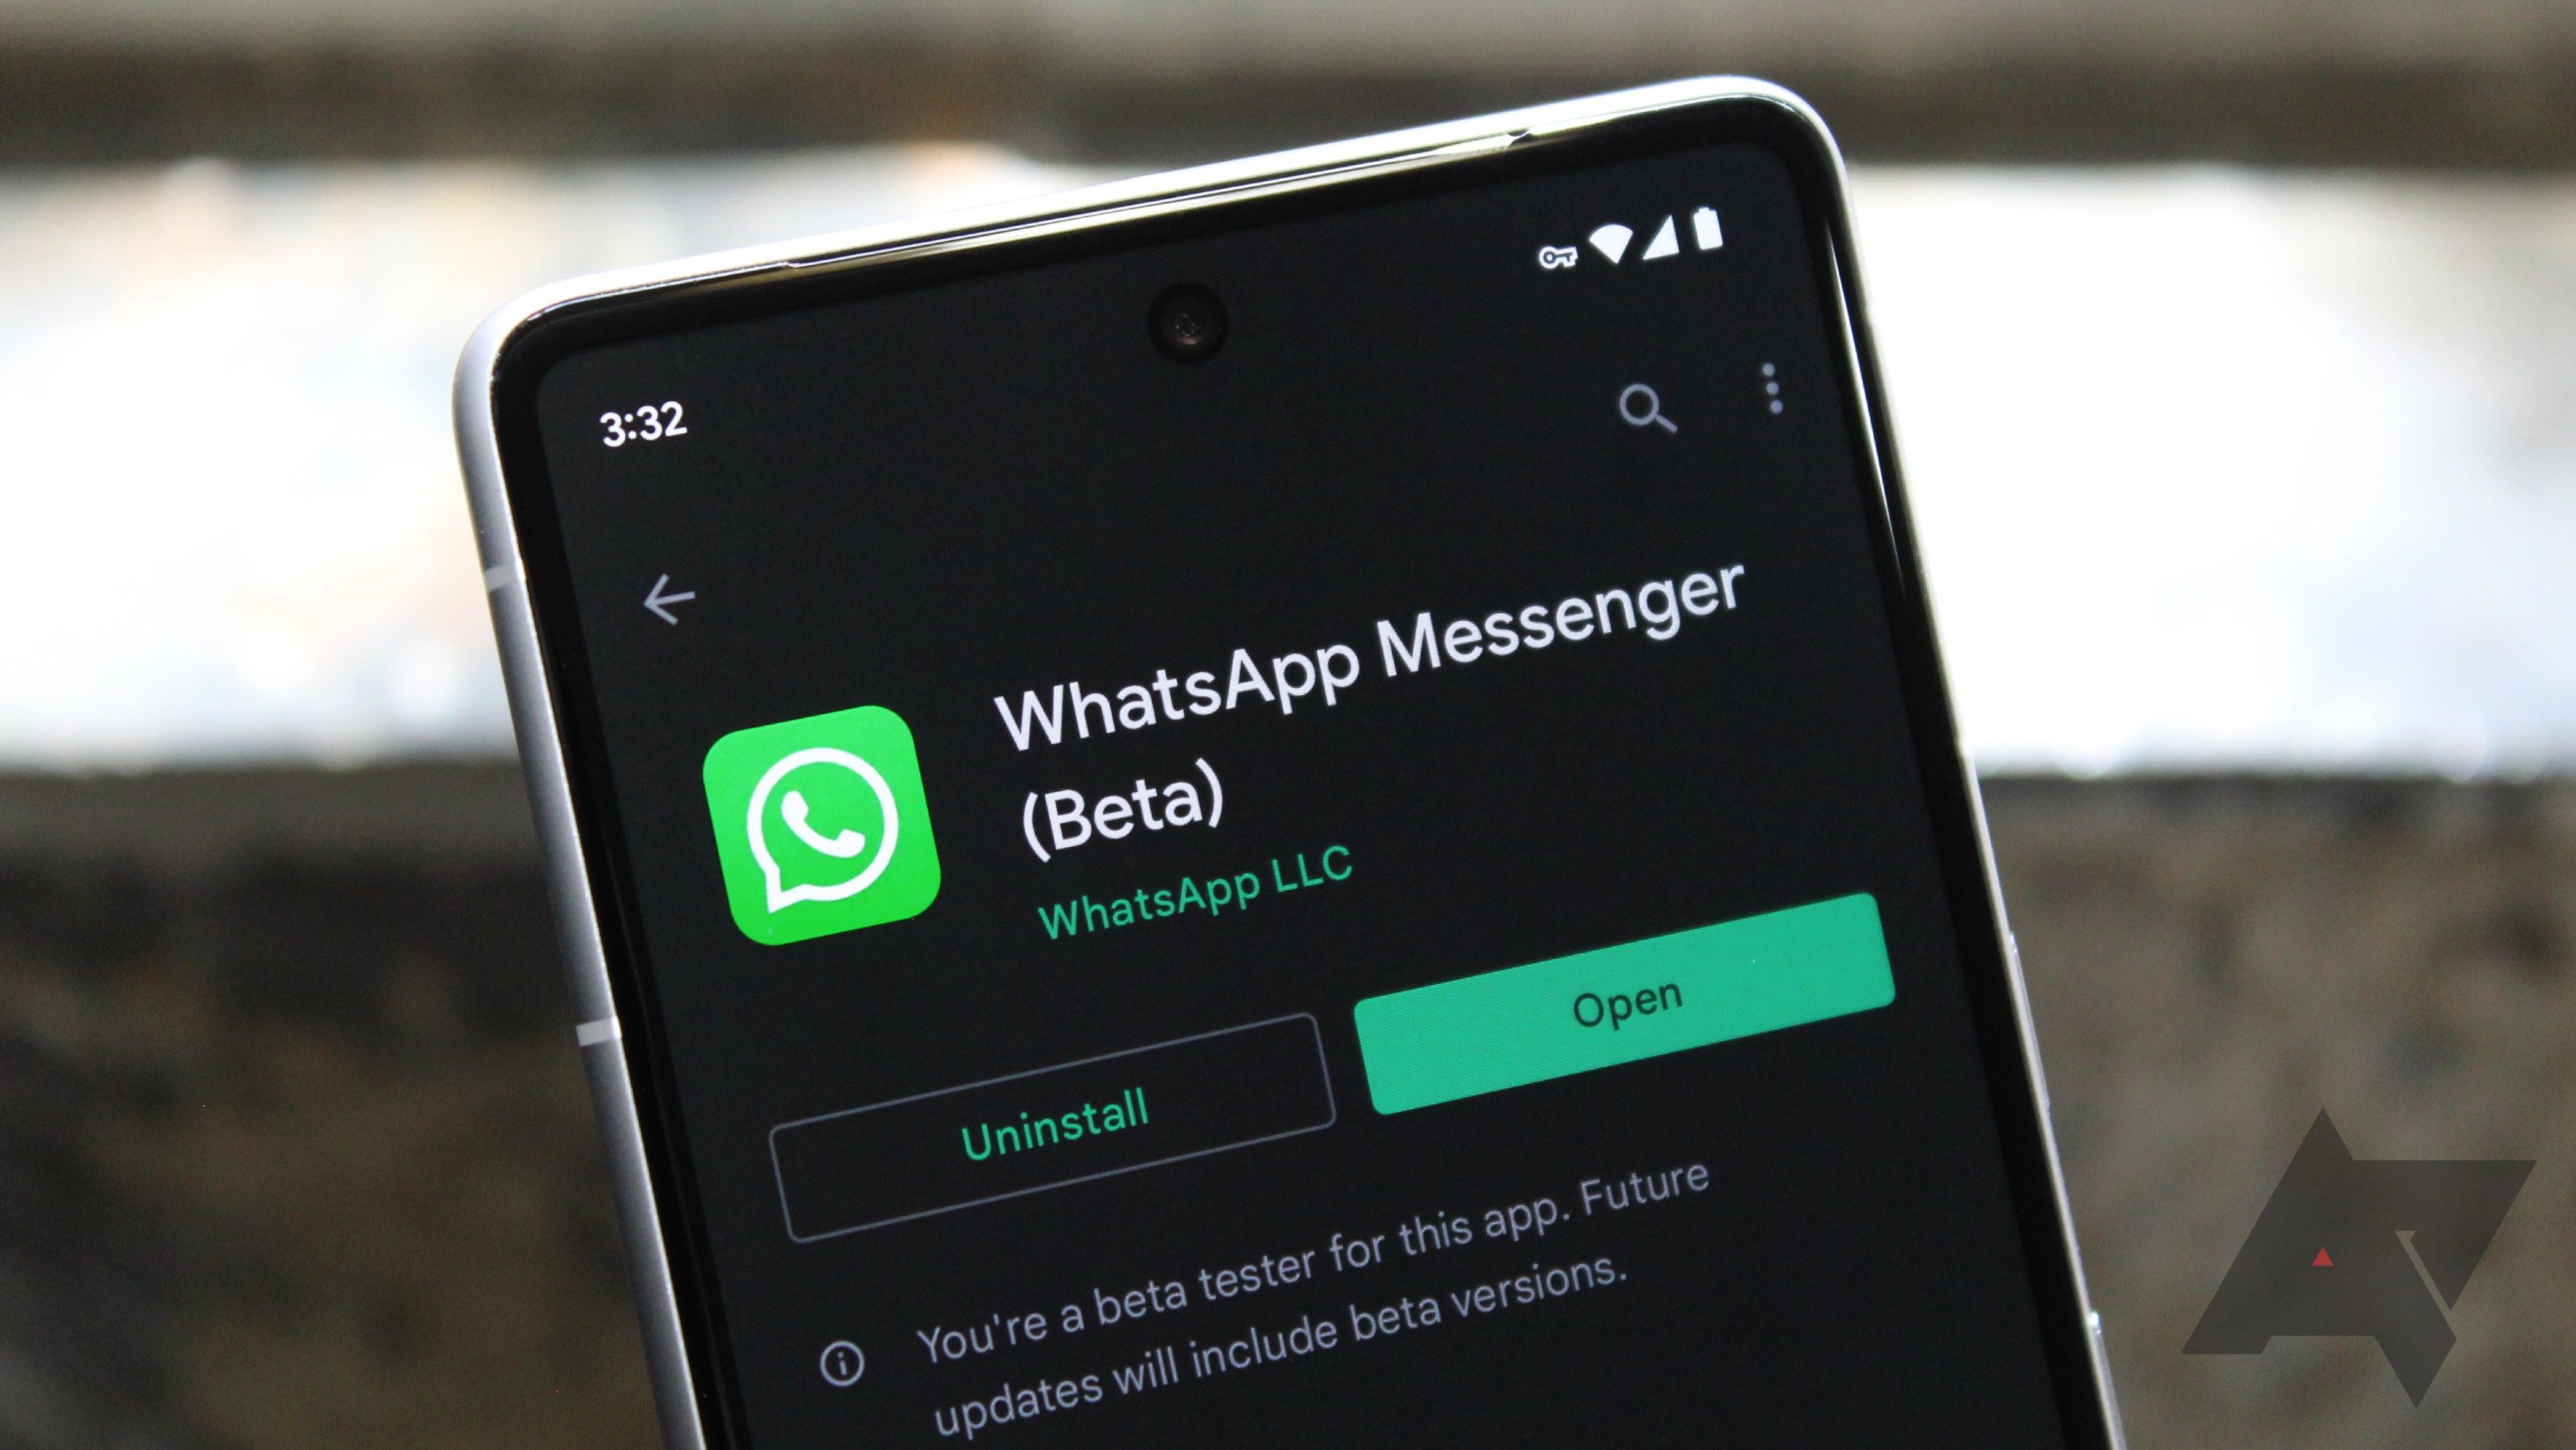 WhatsApp will soon be your one-stop solution for all your chat apps